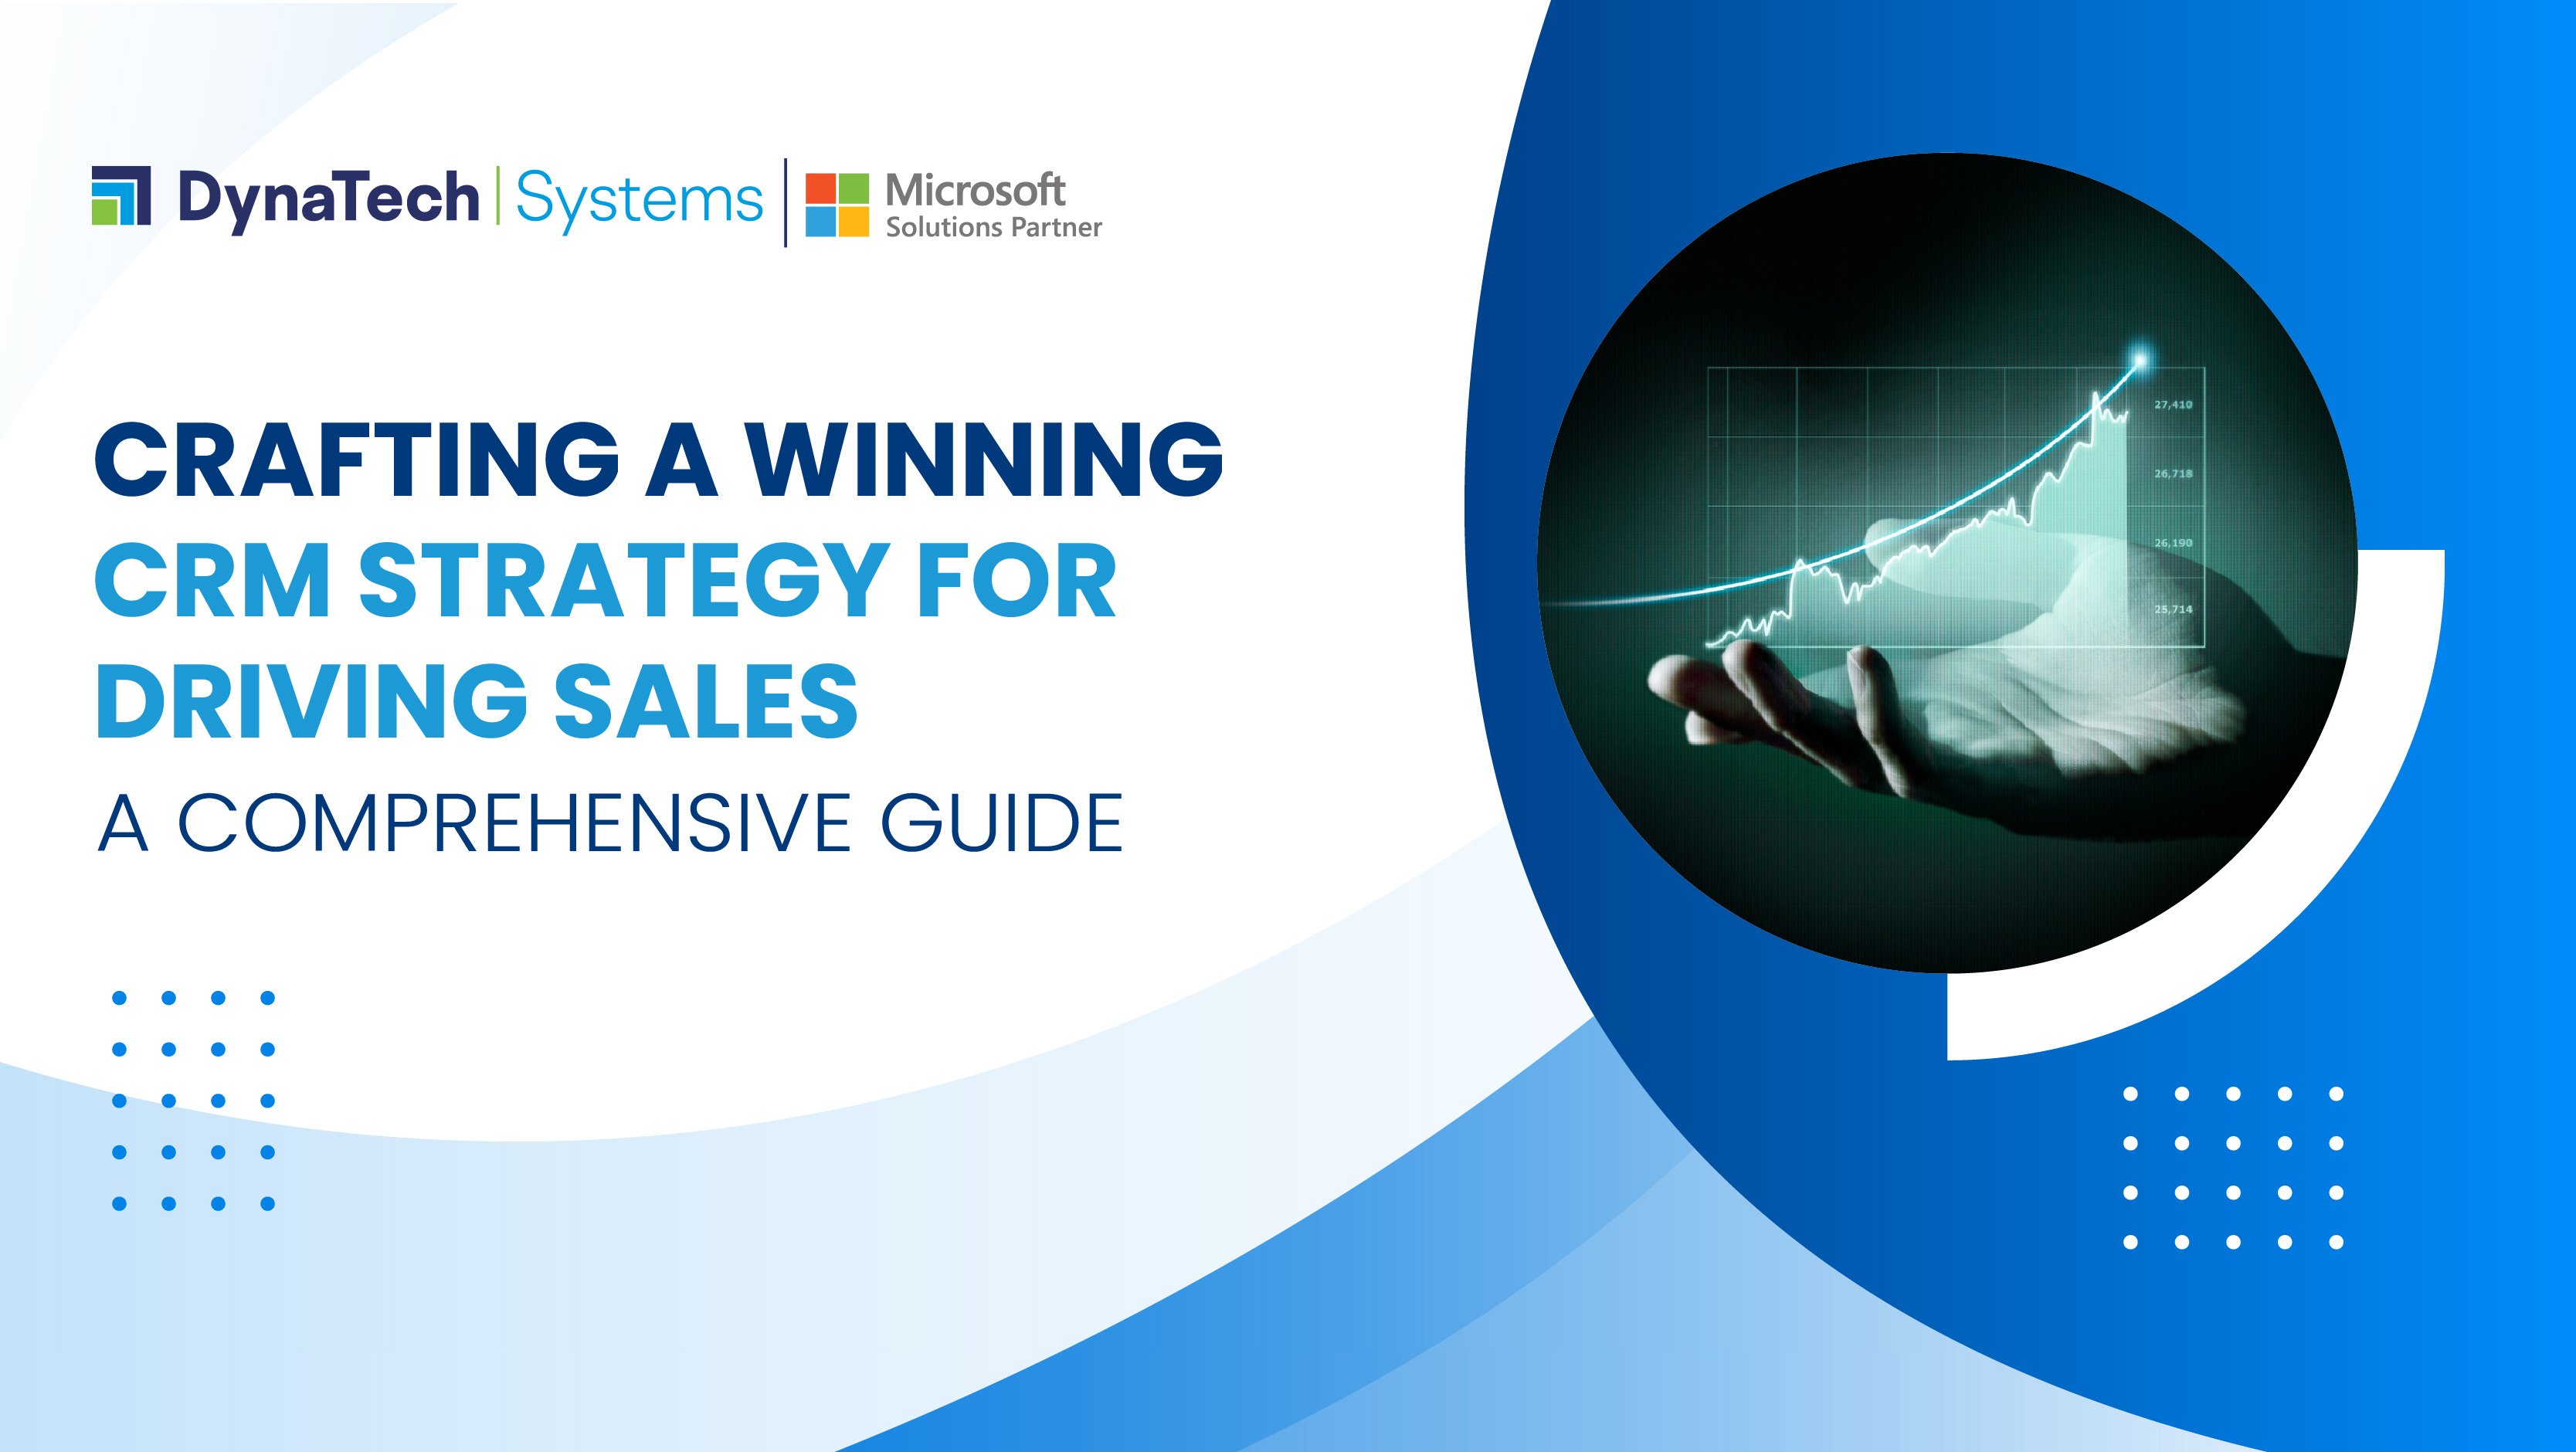 Crafting a Winning CRM Strategy for Driving Sales: A Comprehensive Guide